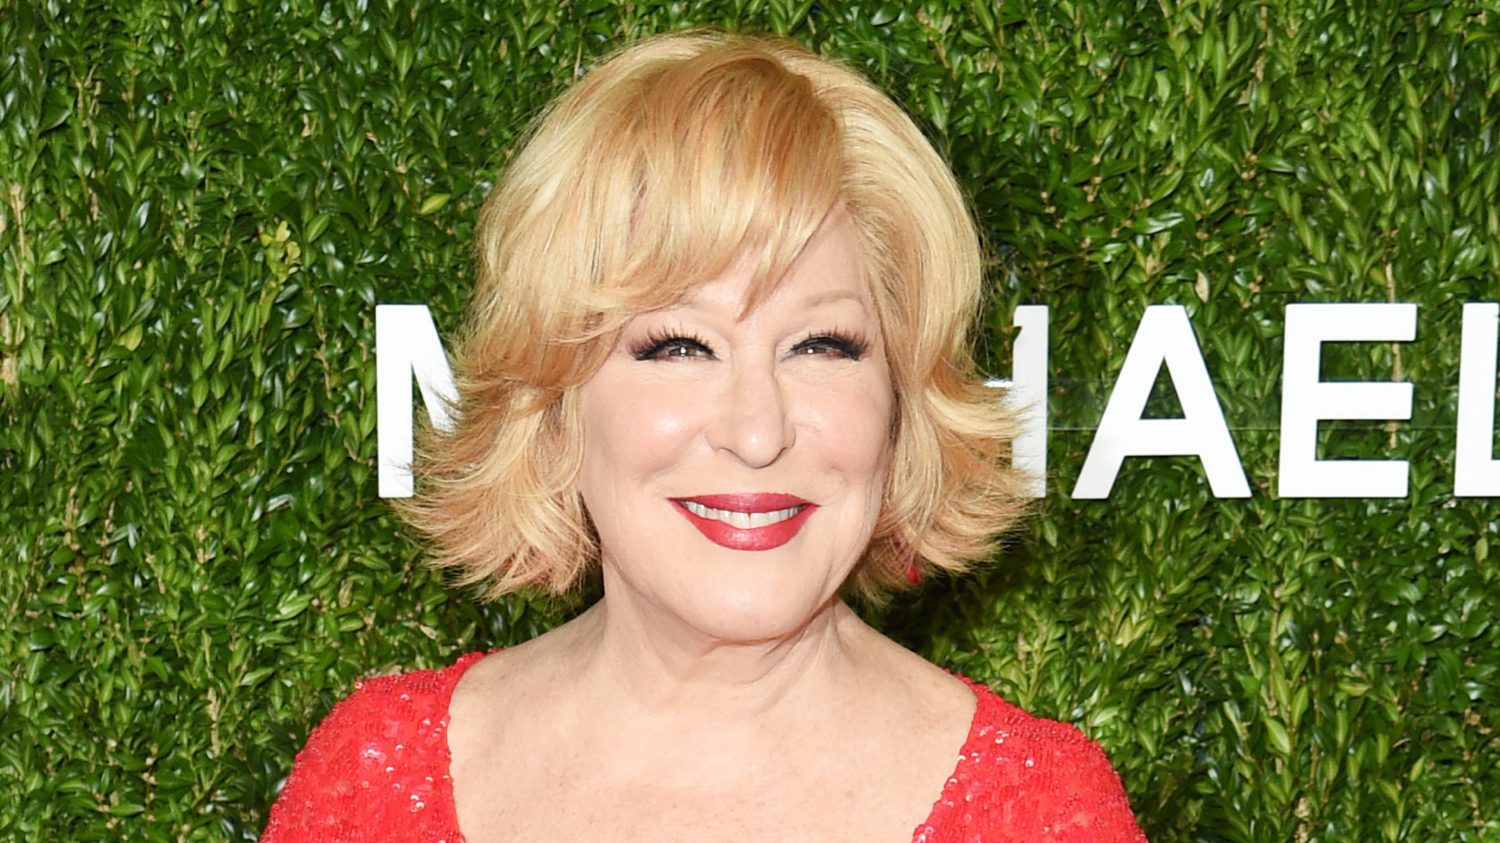 ‘stay-classy’:-bette-midler-slammed-after-suggesting-maga-women-‘move-to-iran’